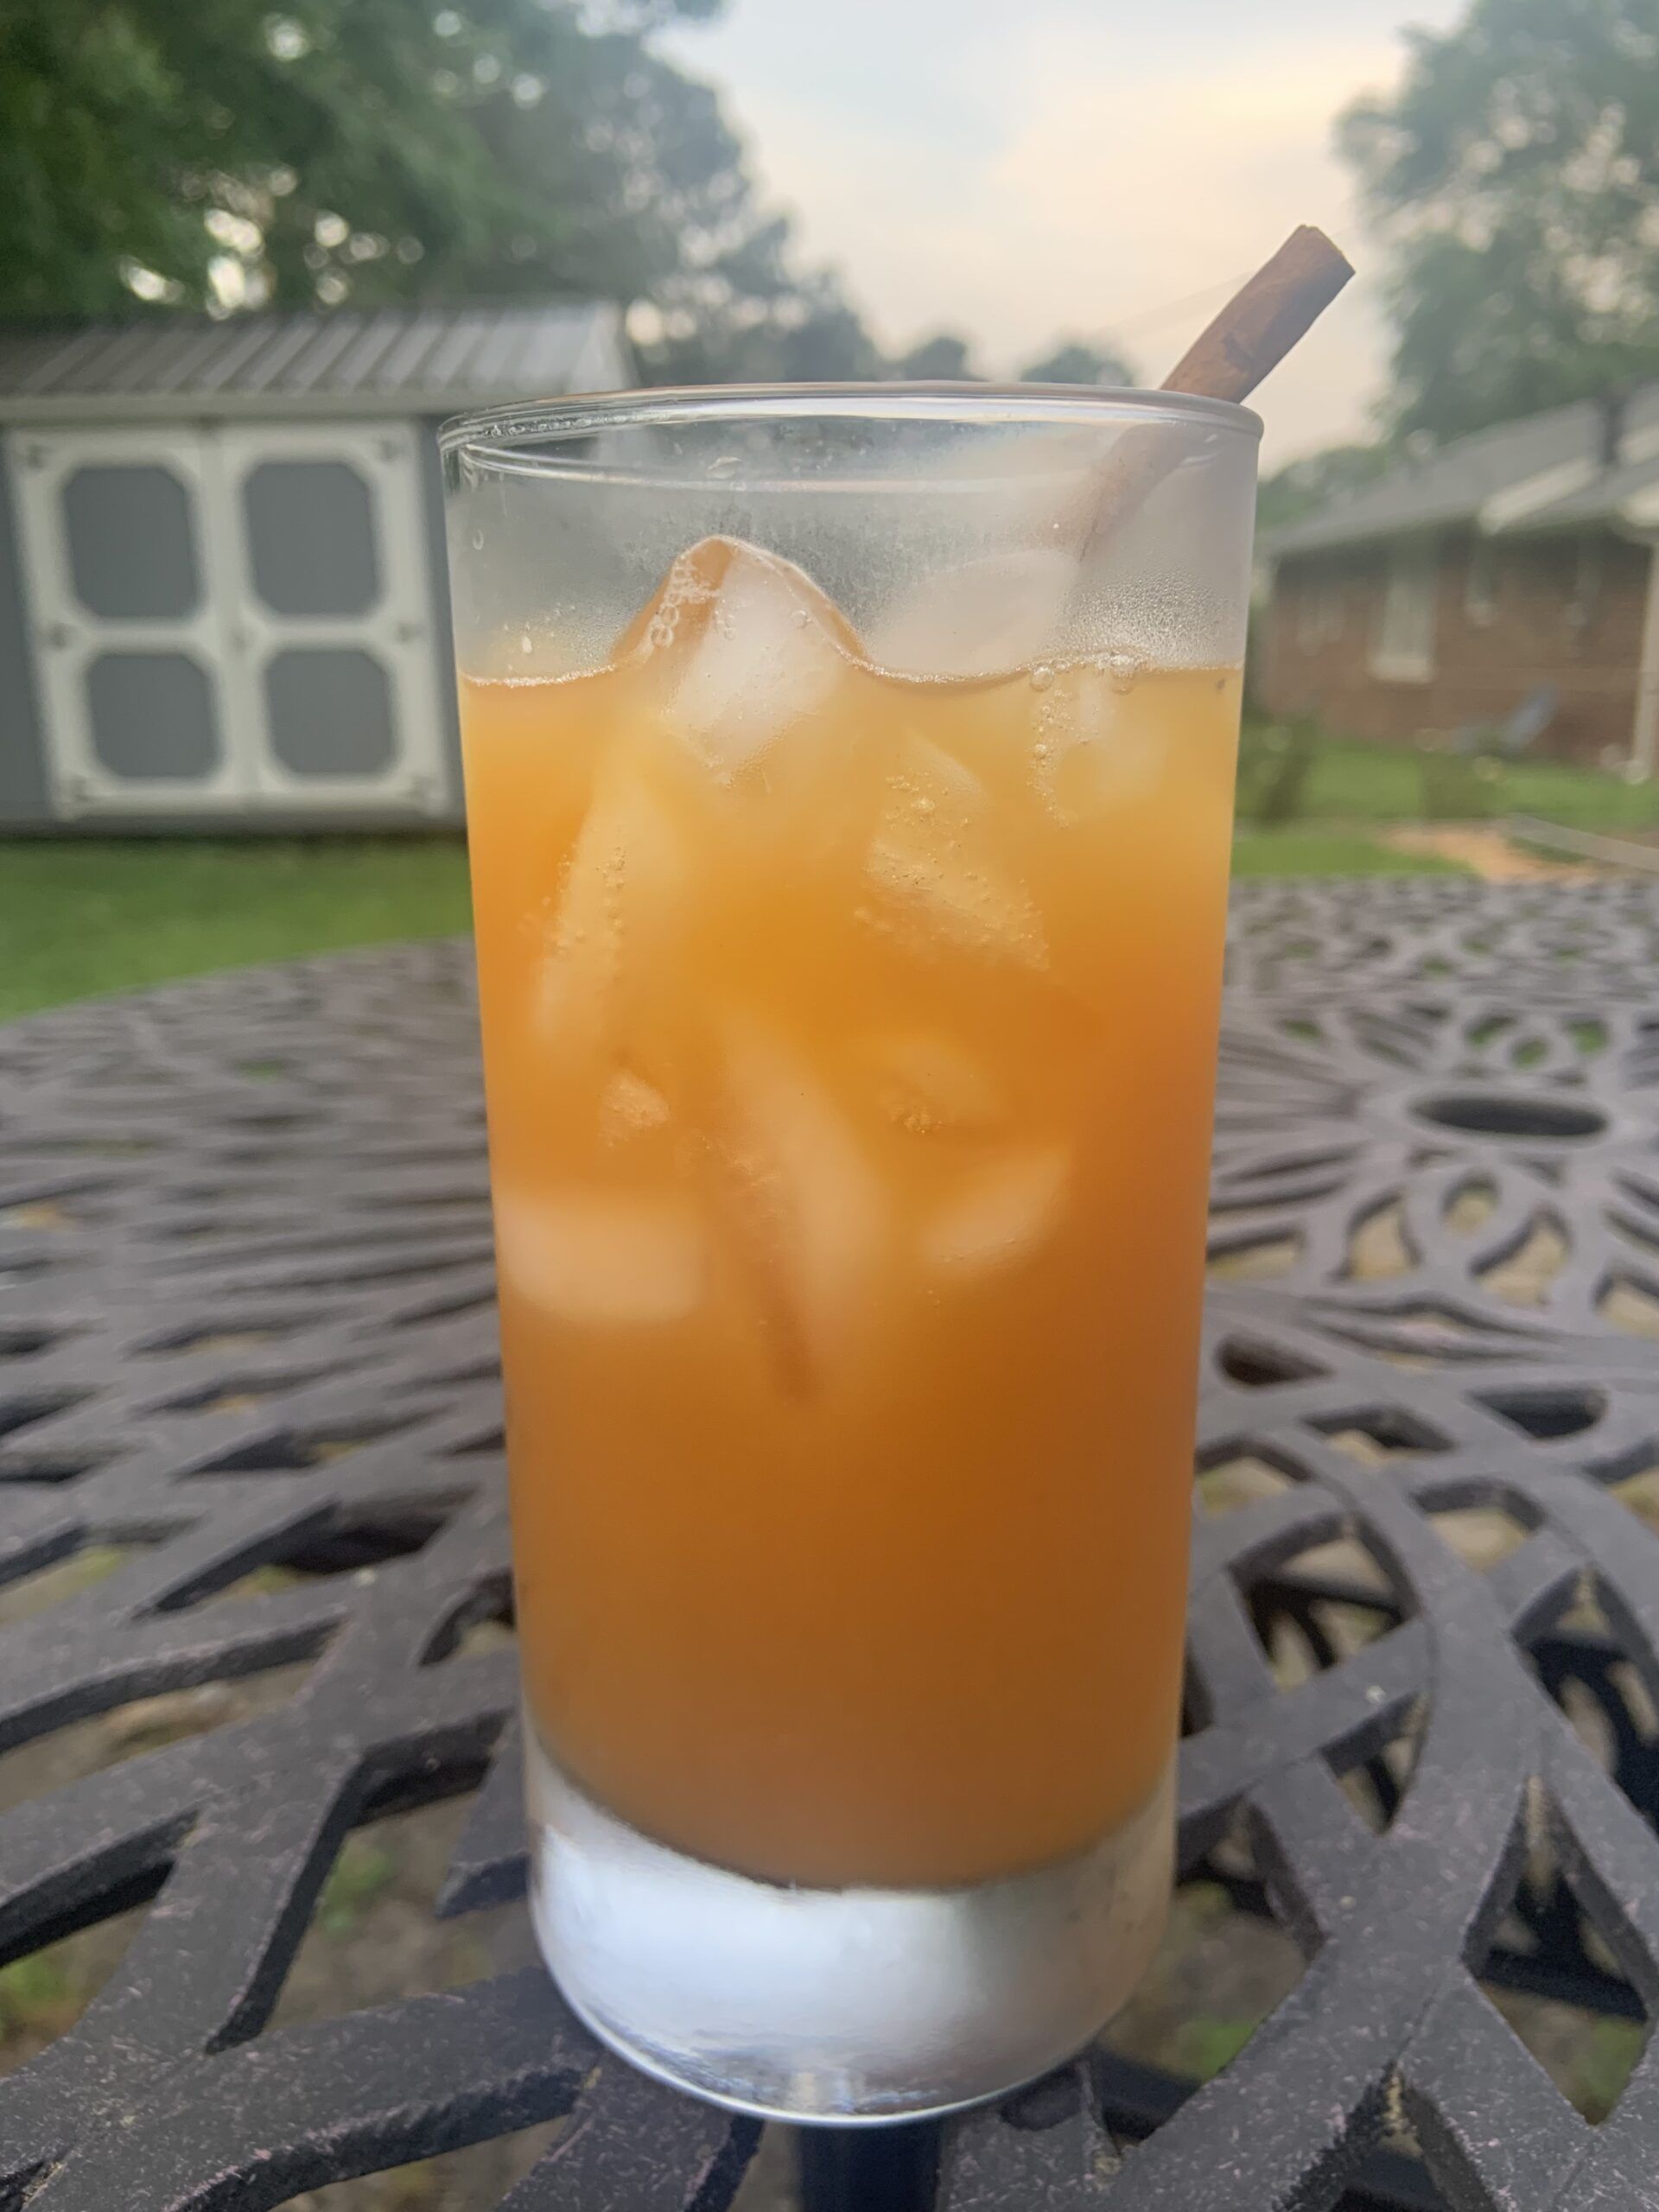 a photo of a glass of iced tea with orange juice and cinnamon stick